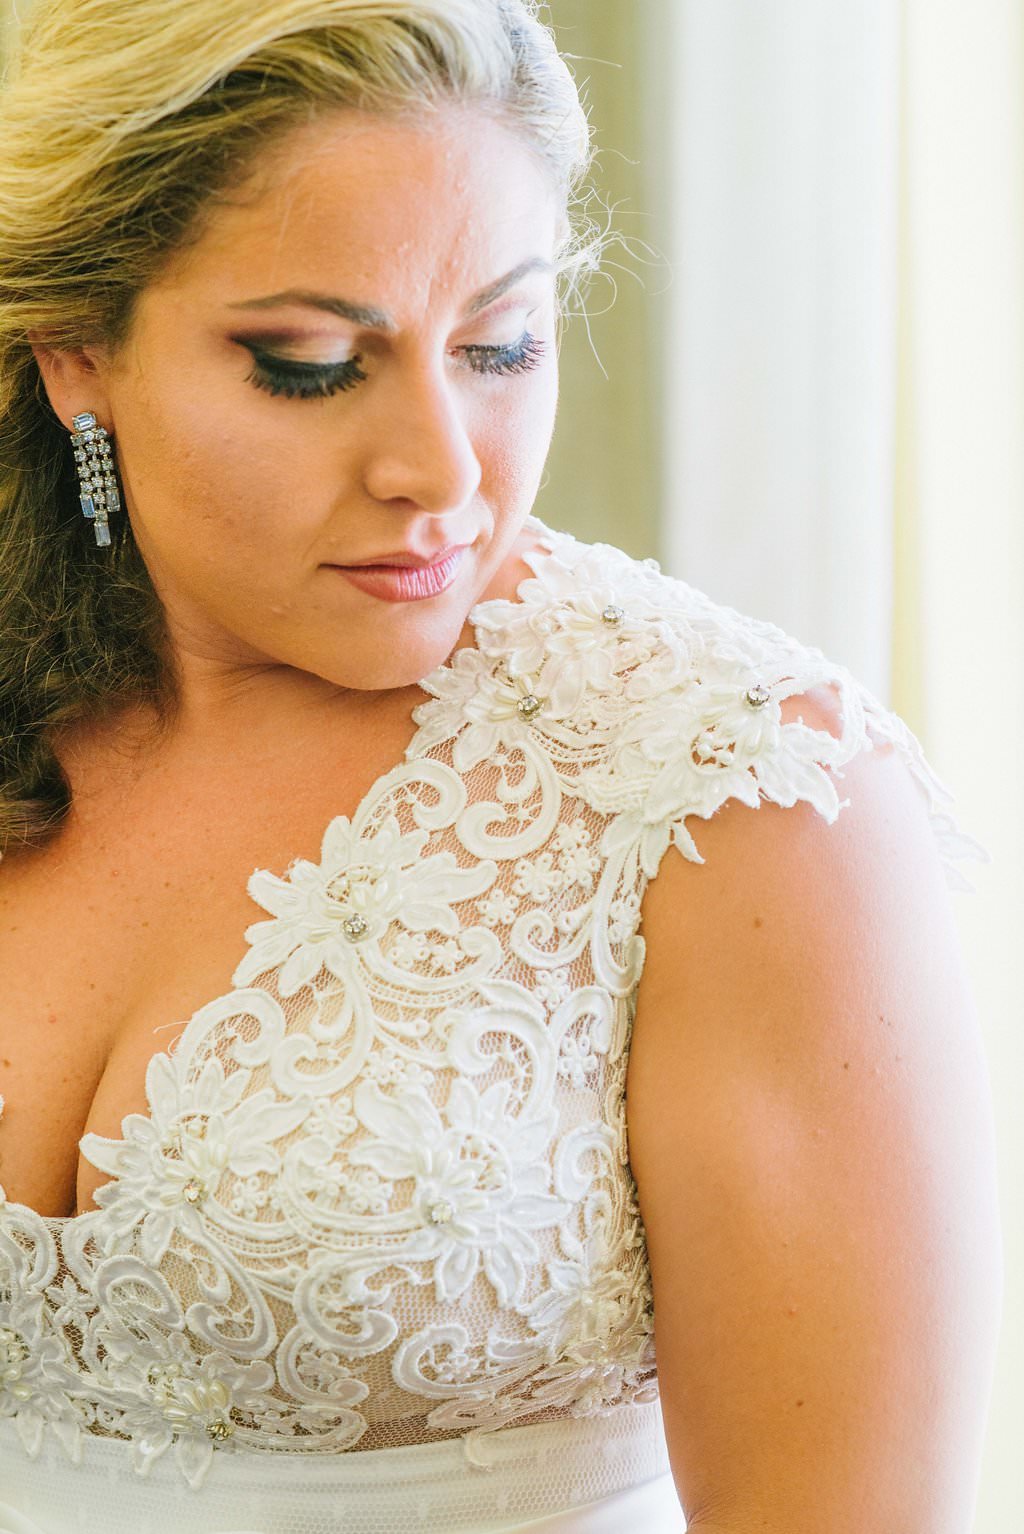 Interior Bride Getting Ready Portrait in Sheer Floral Lace V Neck Wedding Dress